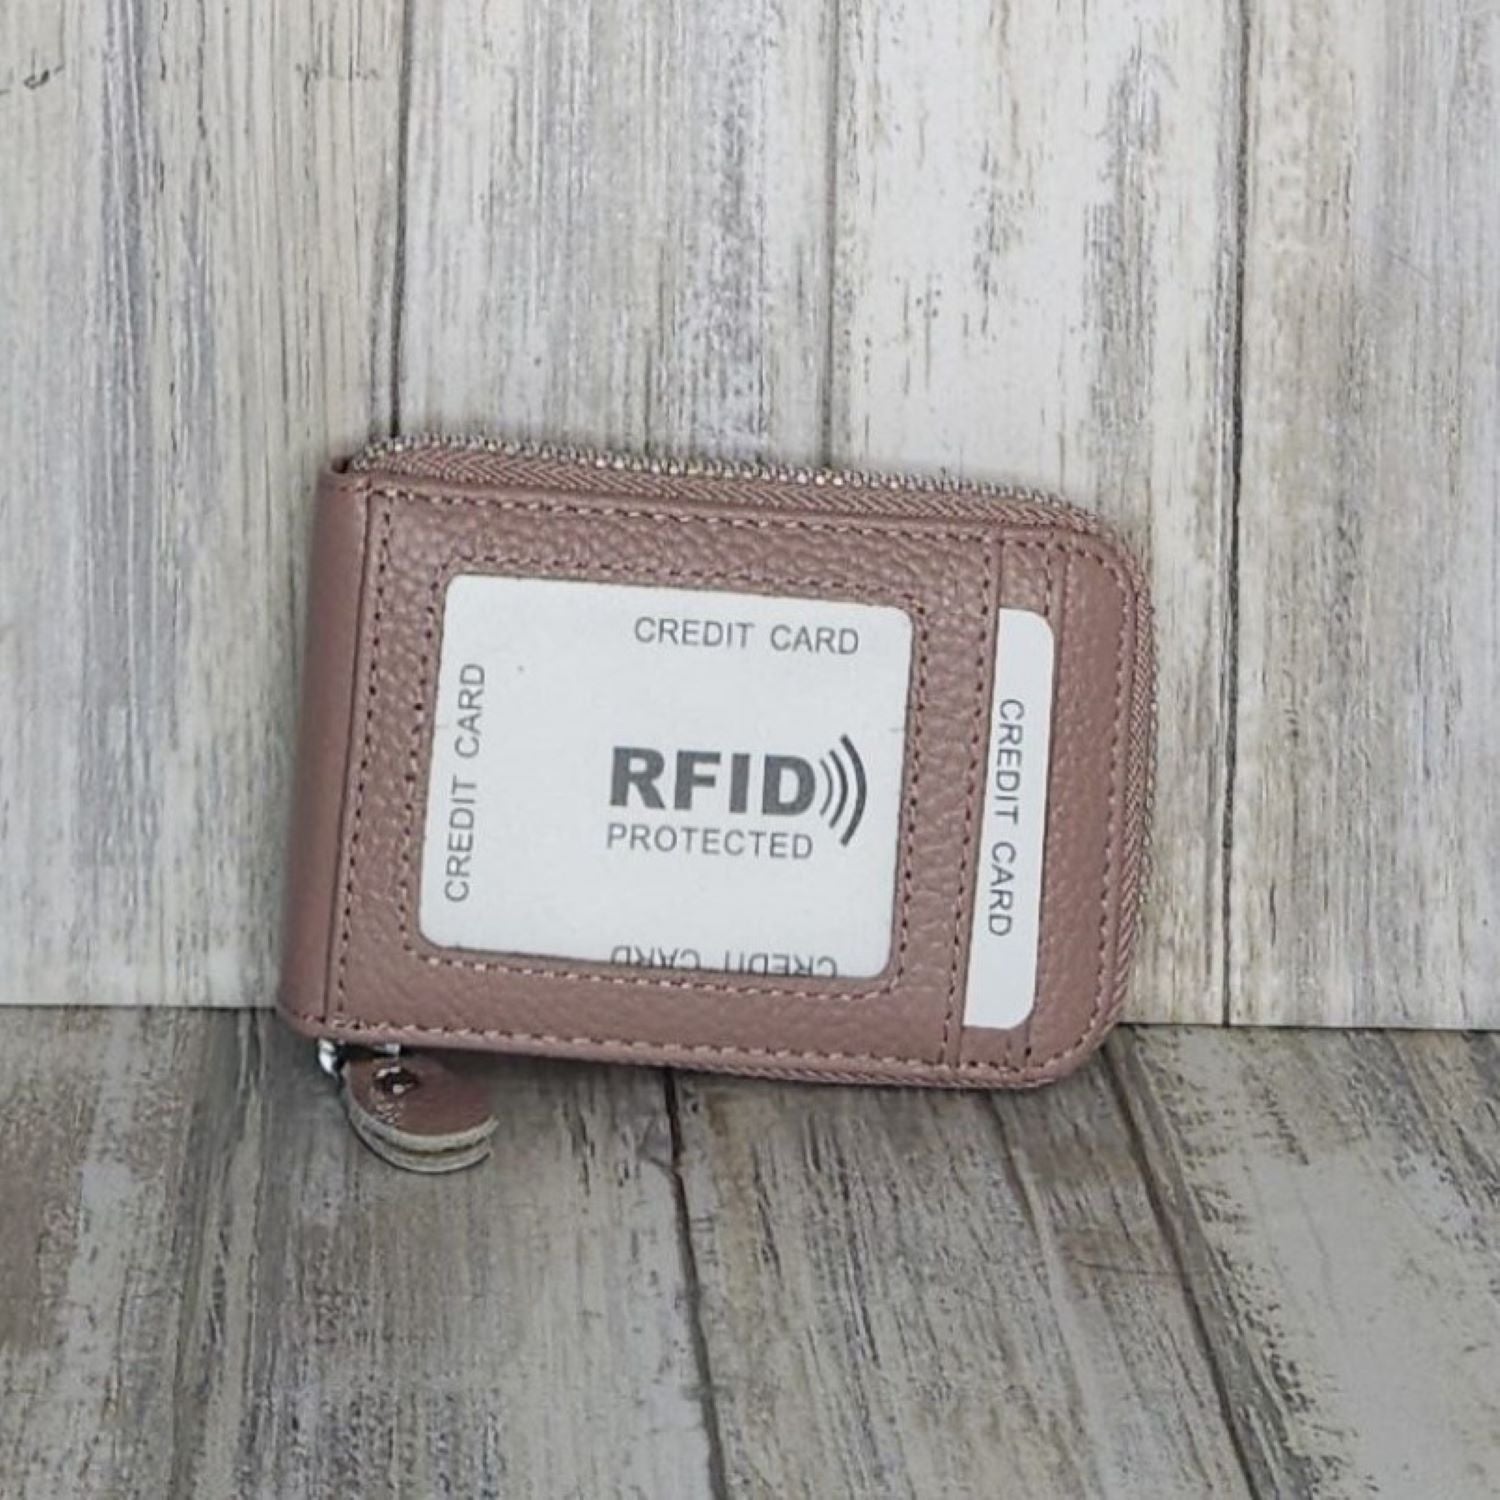 This classic leather card holder features 12 card slots for easy organization. It also includes a single zip and enough space to store a few notes or receipts. Made from premium pebbled leather, it is lightweight yet durable, offering a perfect balance of style and convenience.